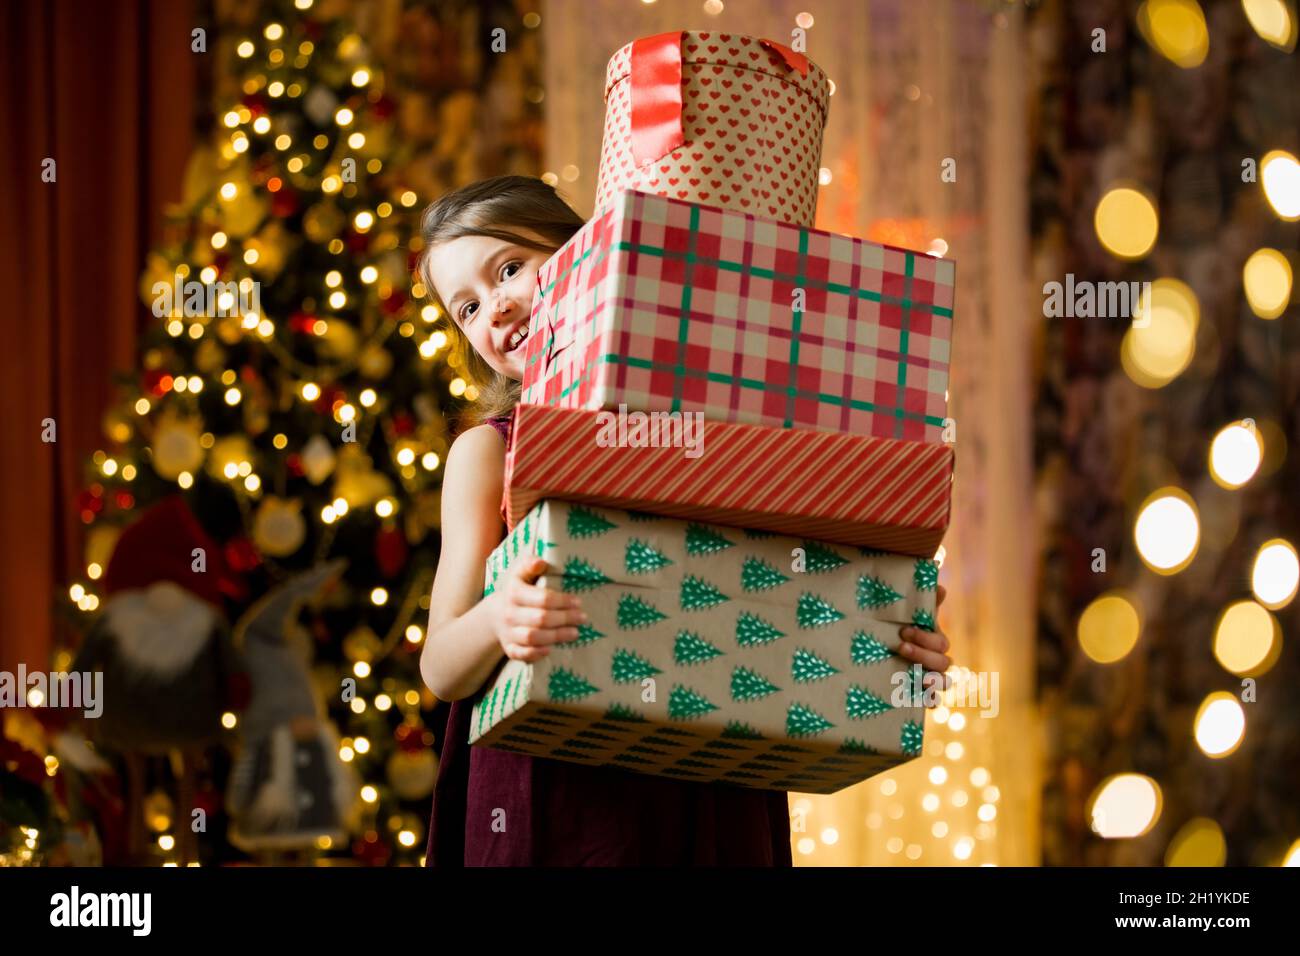 Excited curious little girl smiling, holding pile of Christmas gifts. Beautifully decorated loving room with lights and Christmas tree. Happy holiday Stock Photo